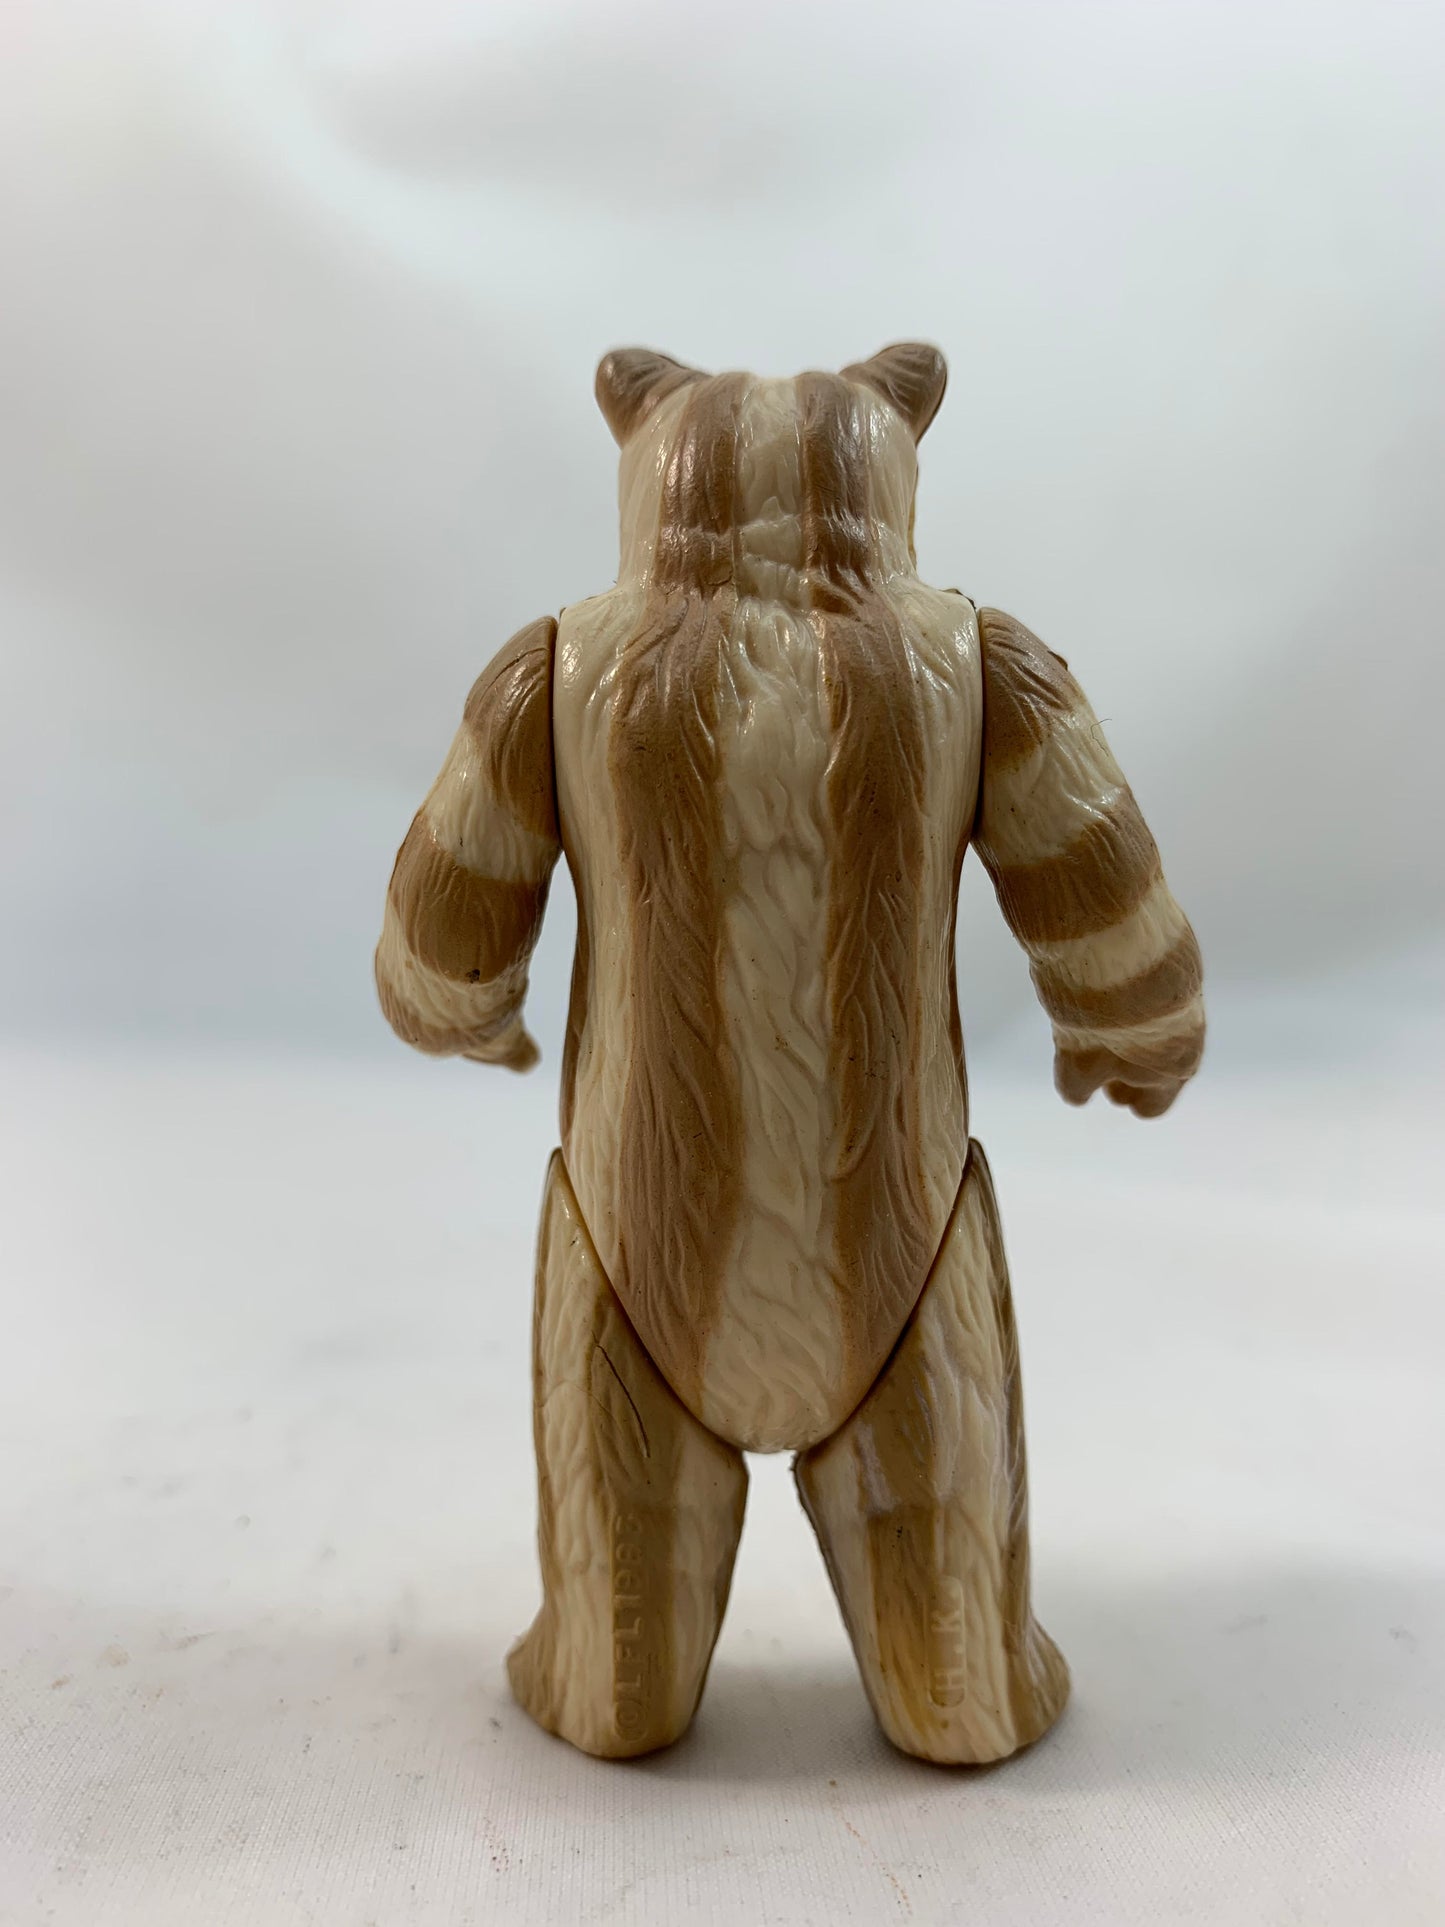 Kenner Vintage Star Wars: ROTJ Logray Medicine Man Ewok 100% Original Complete with weapons and accessories COO - Loose